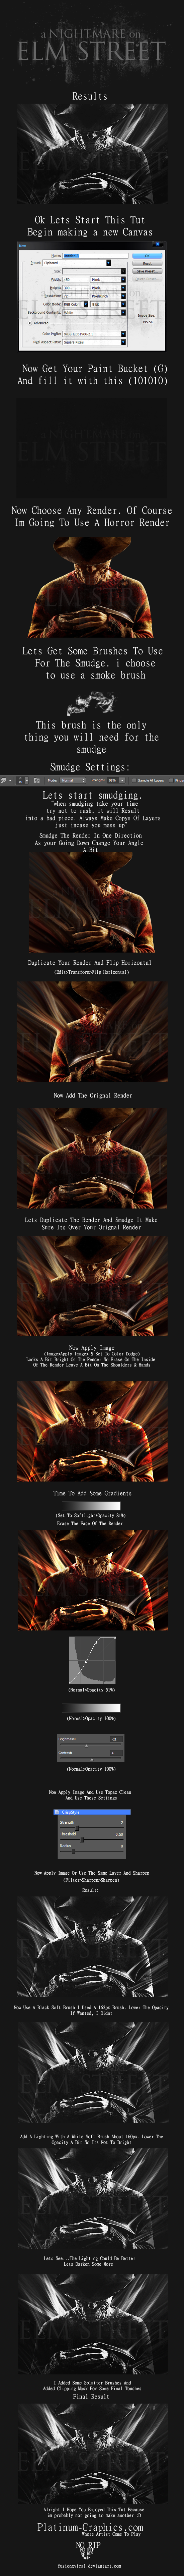 a_nightmare_on_elm_street_smudge_tut_by_fusionxviral-d5j4ohw.png